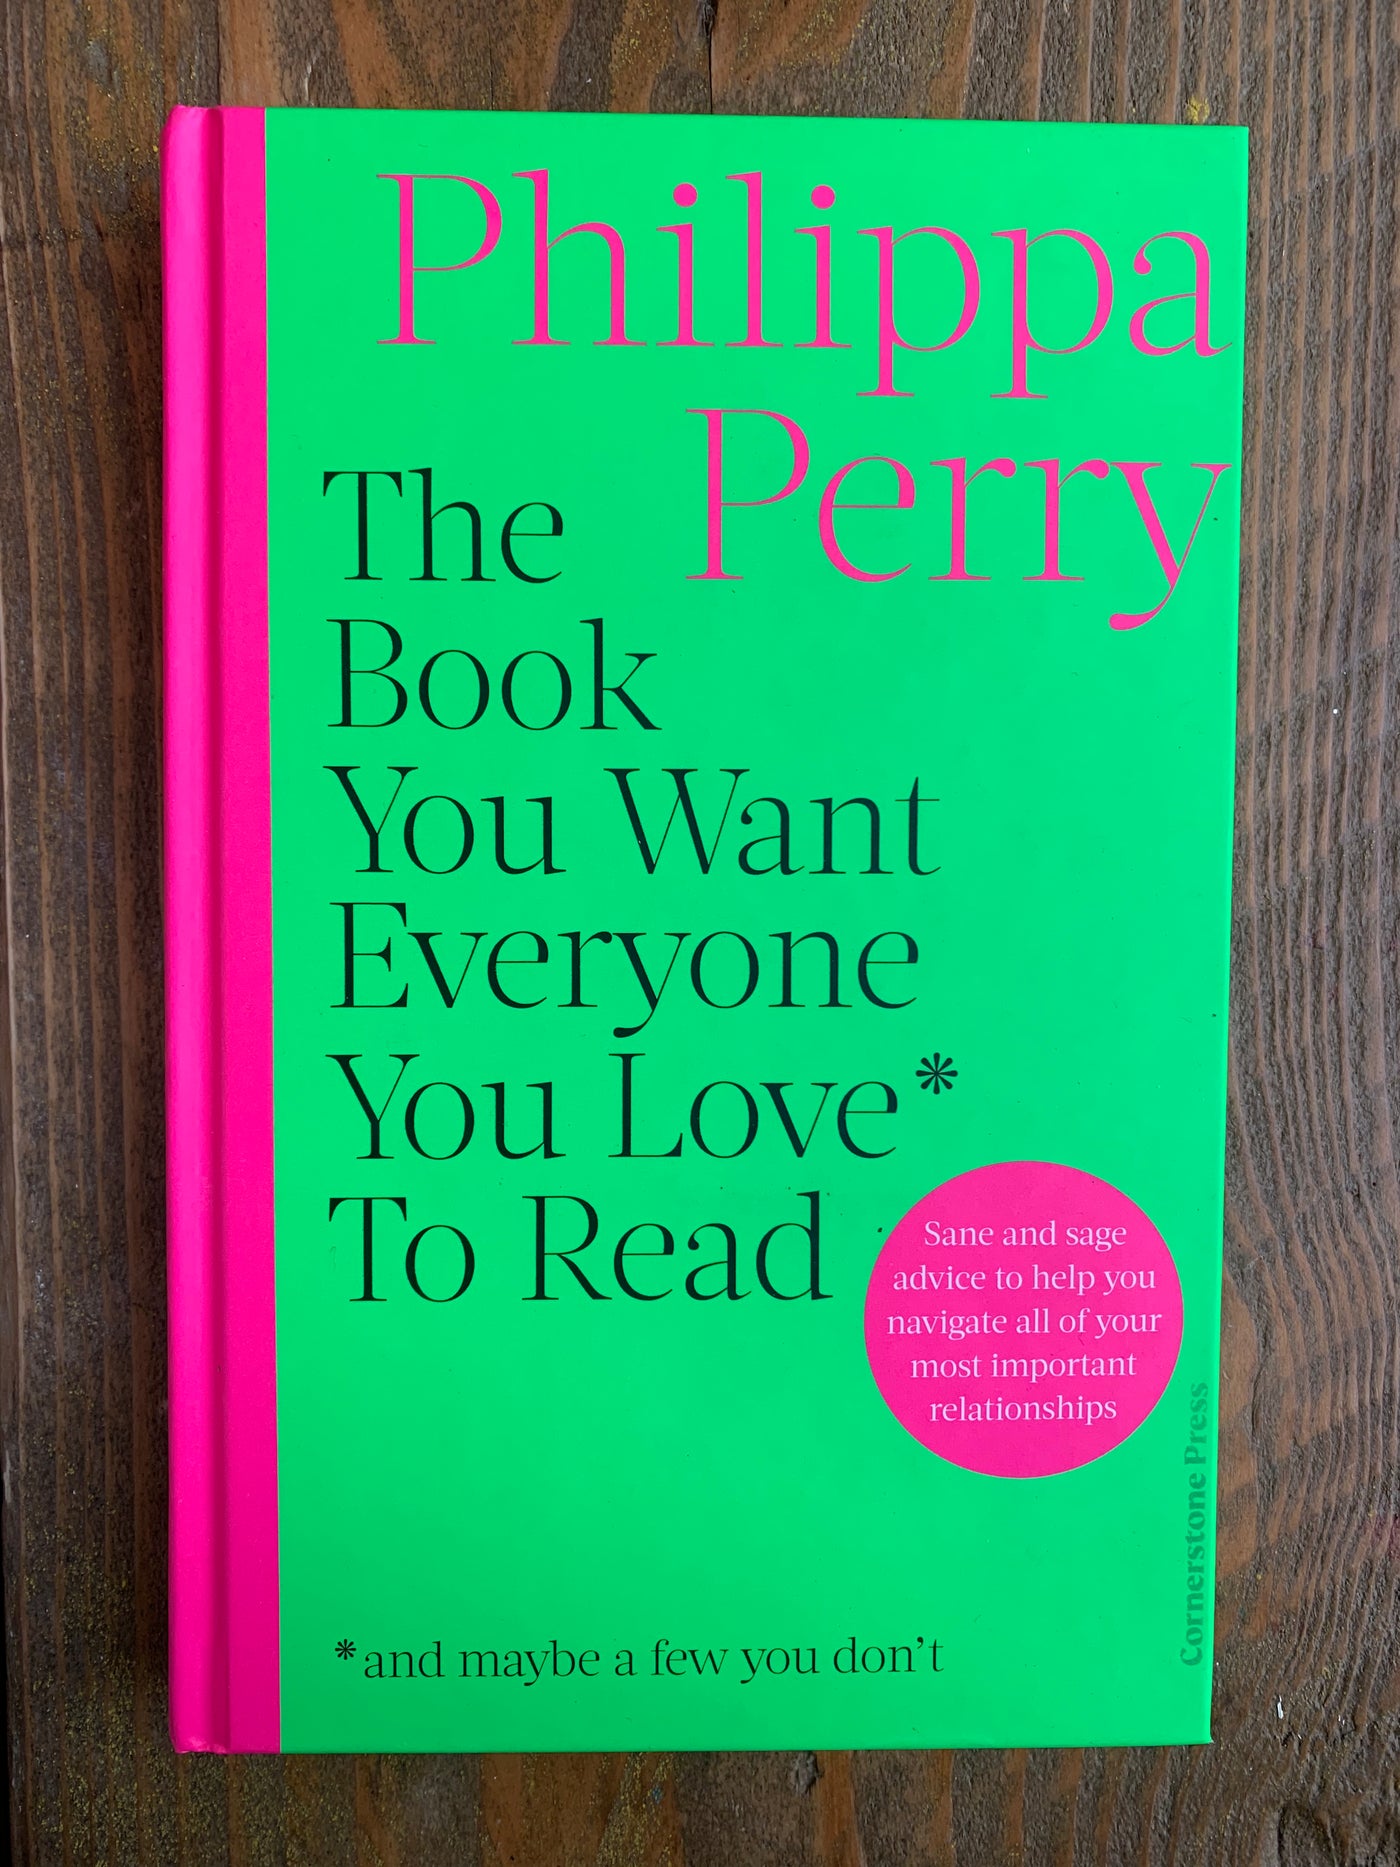 The Book You Want Everyone You Love To Read